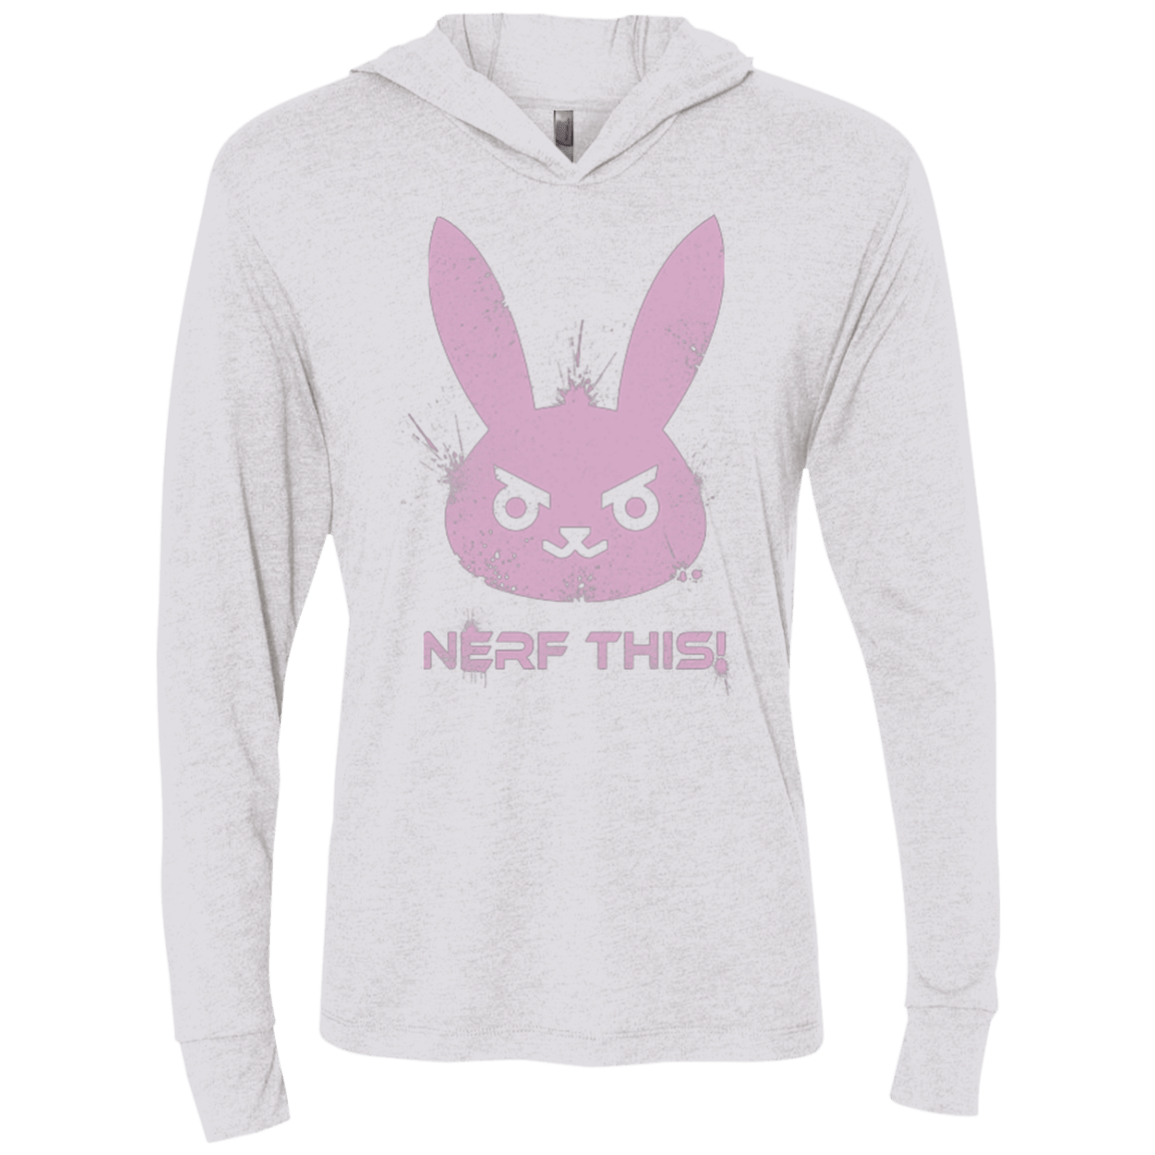 T-Shirts Heather White / X-Small Nerf This Triblend Long Sleeve Hoodie Tee